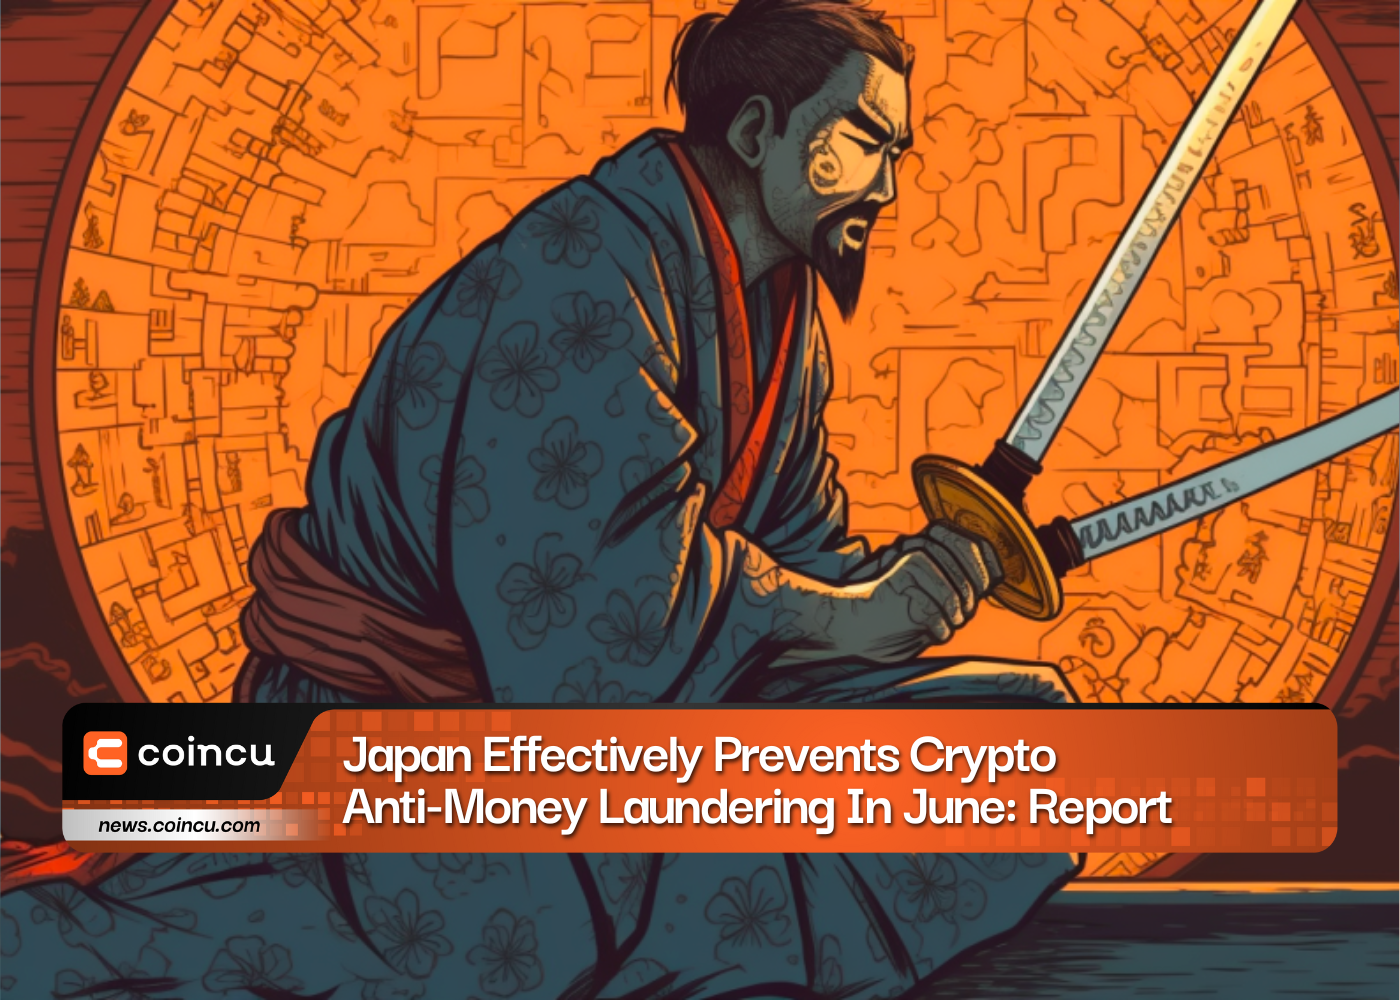 Japan Effectively Prevents Crypto Anti-Money Laundering In June: Report